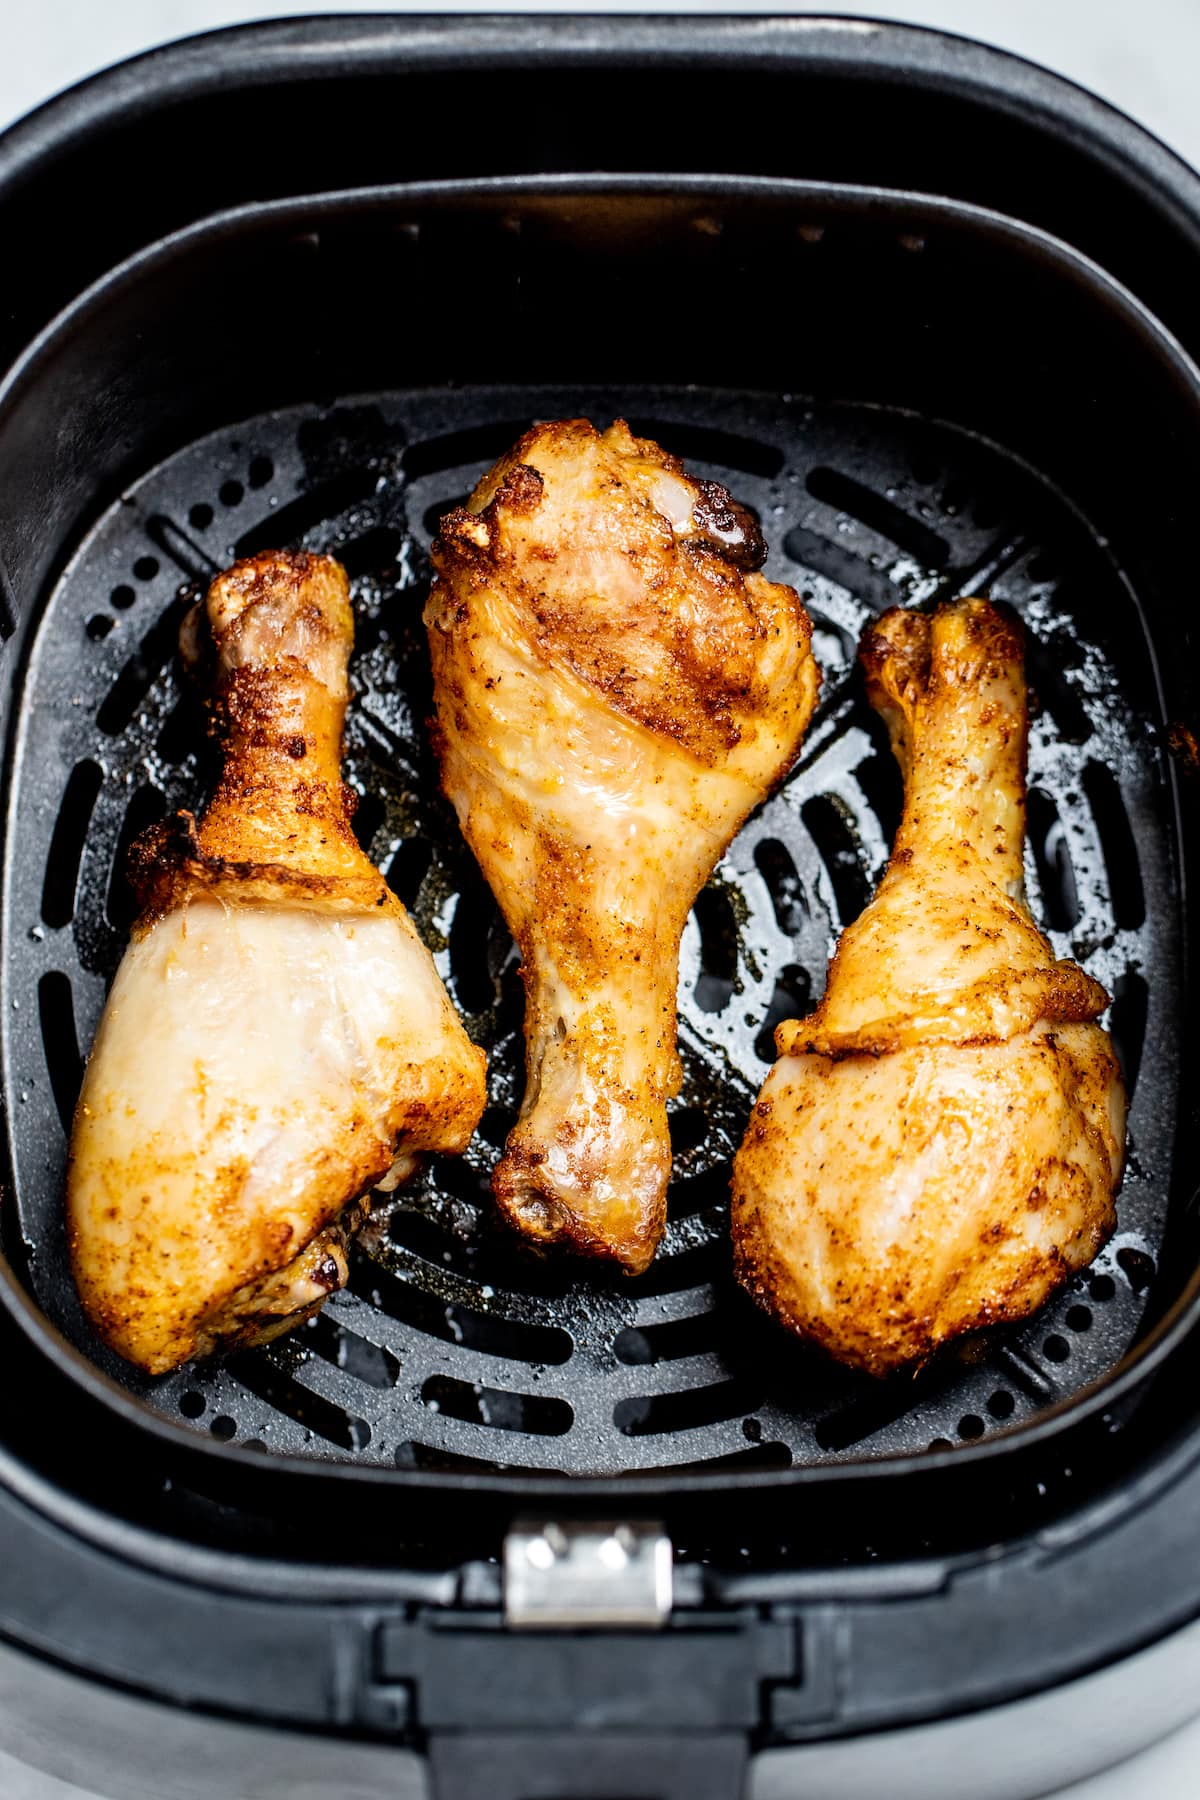 How to Properly Season Air Fryer Basket to Prevent Sticking - This Old Gal